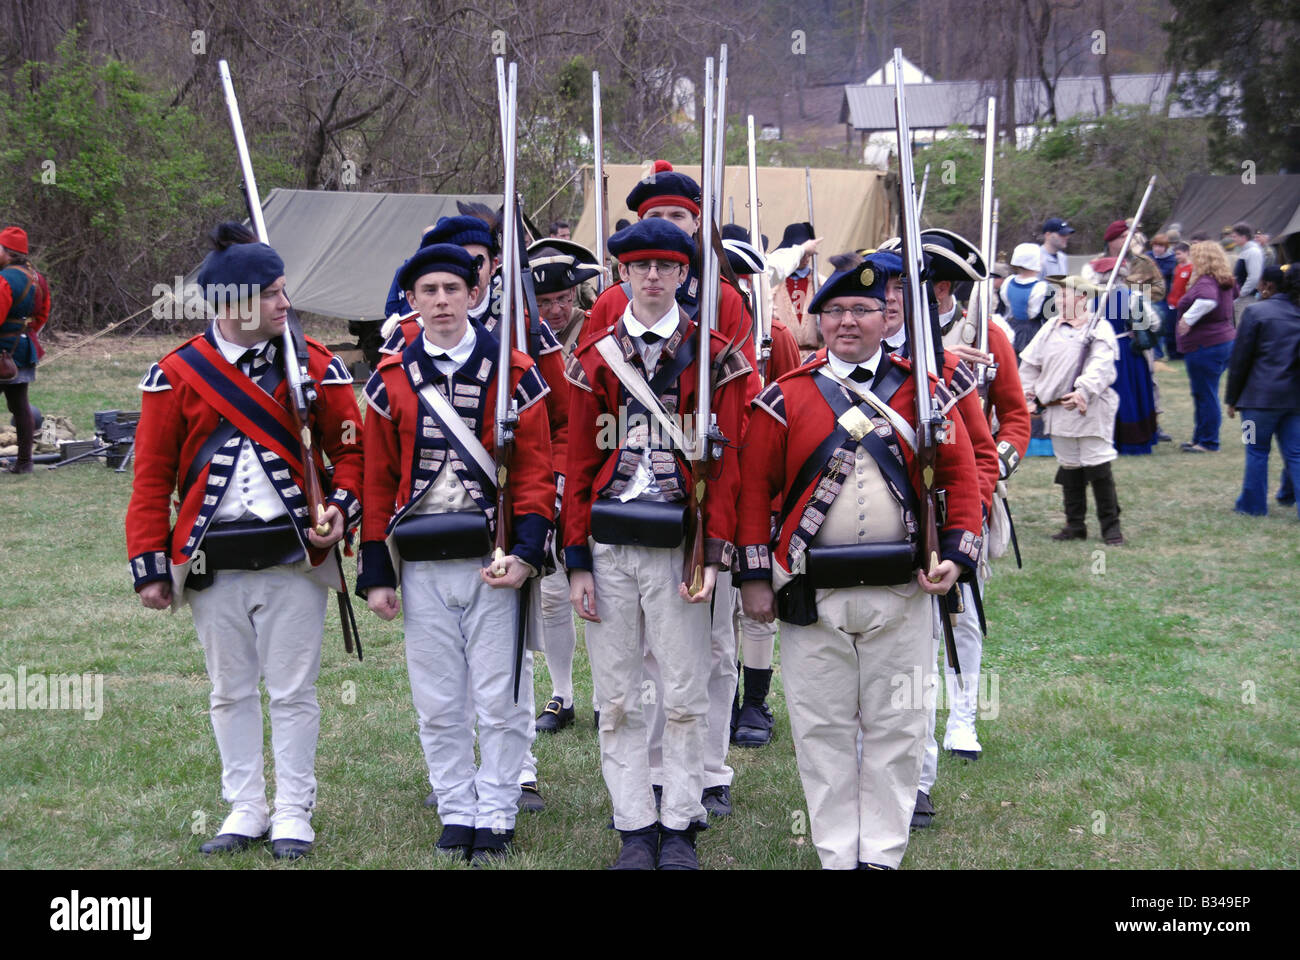 British soldiers march in reenactment of Revolutionary War in Glendale, Md Stock Photo